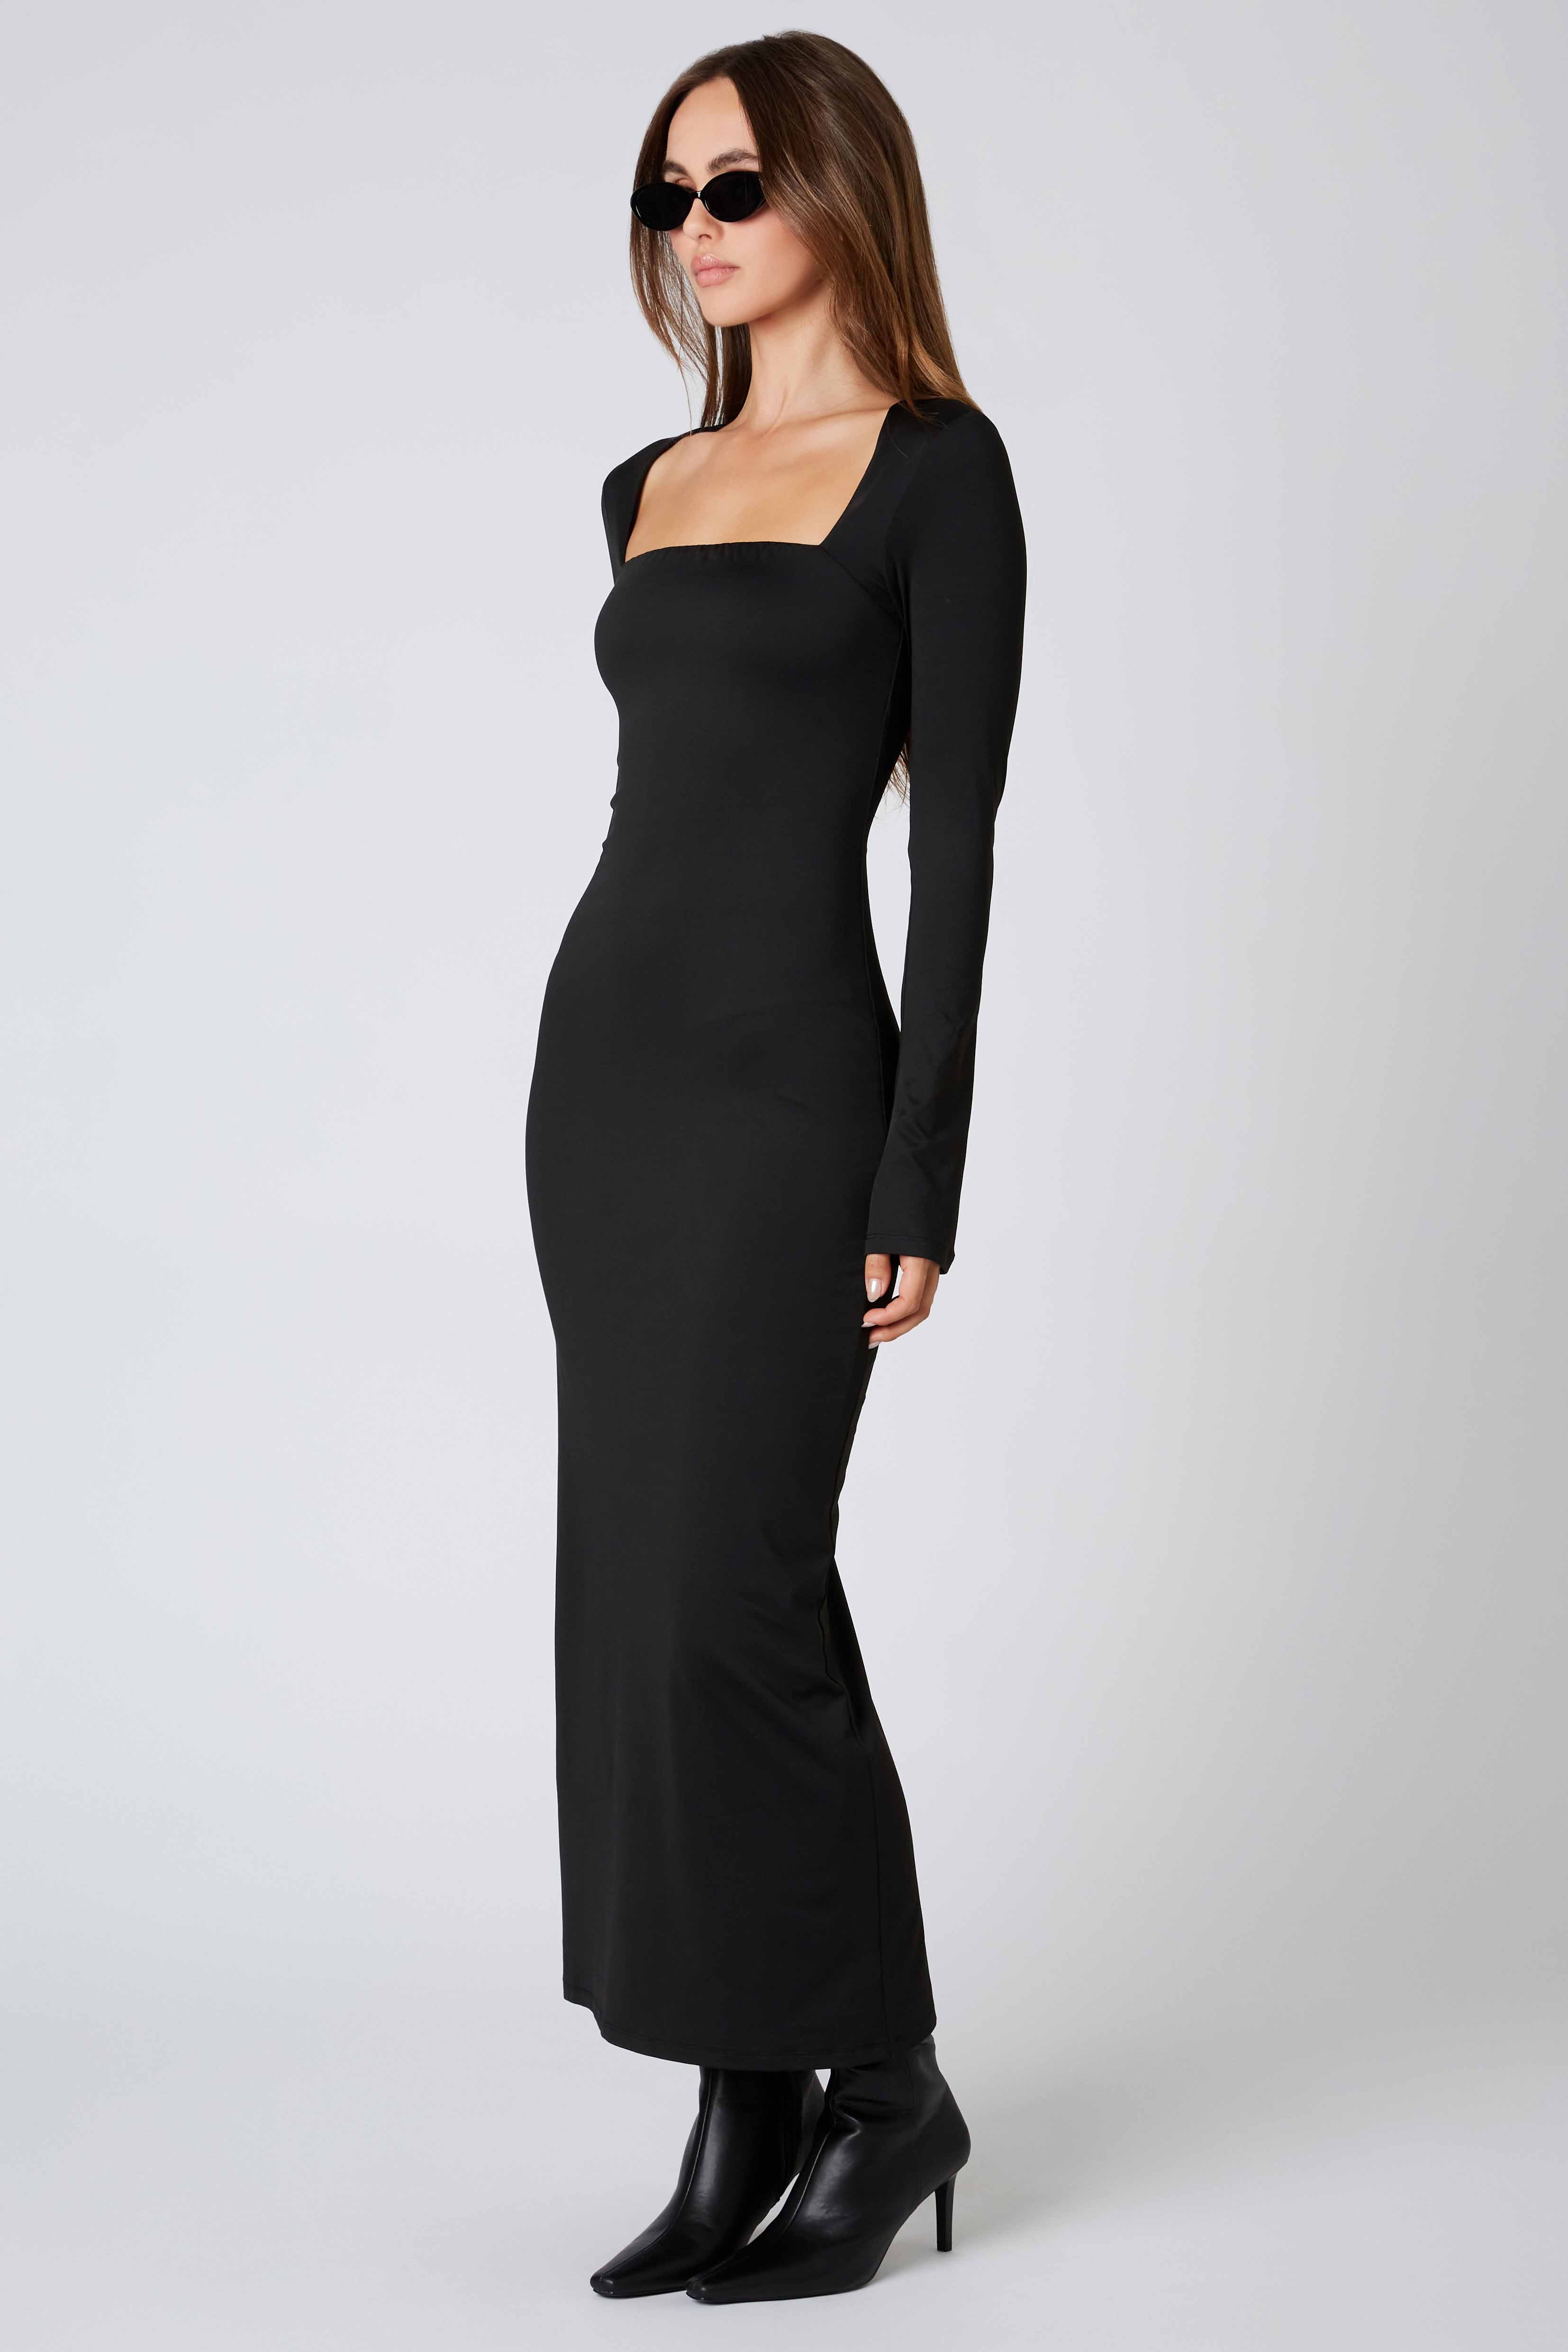 Long Sleeve Maxi Dress in Black Side View